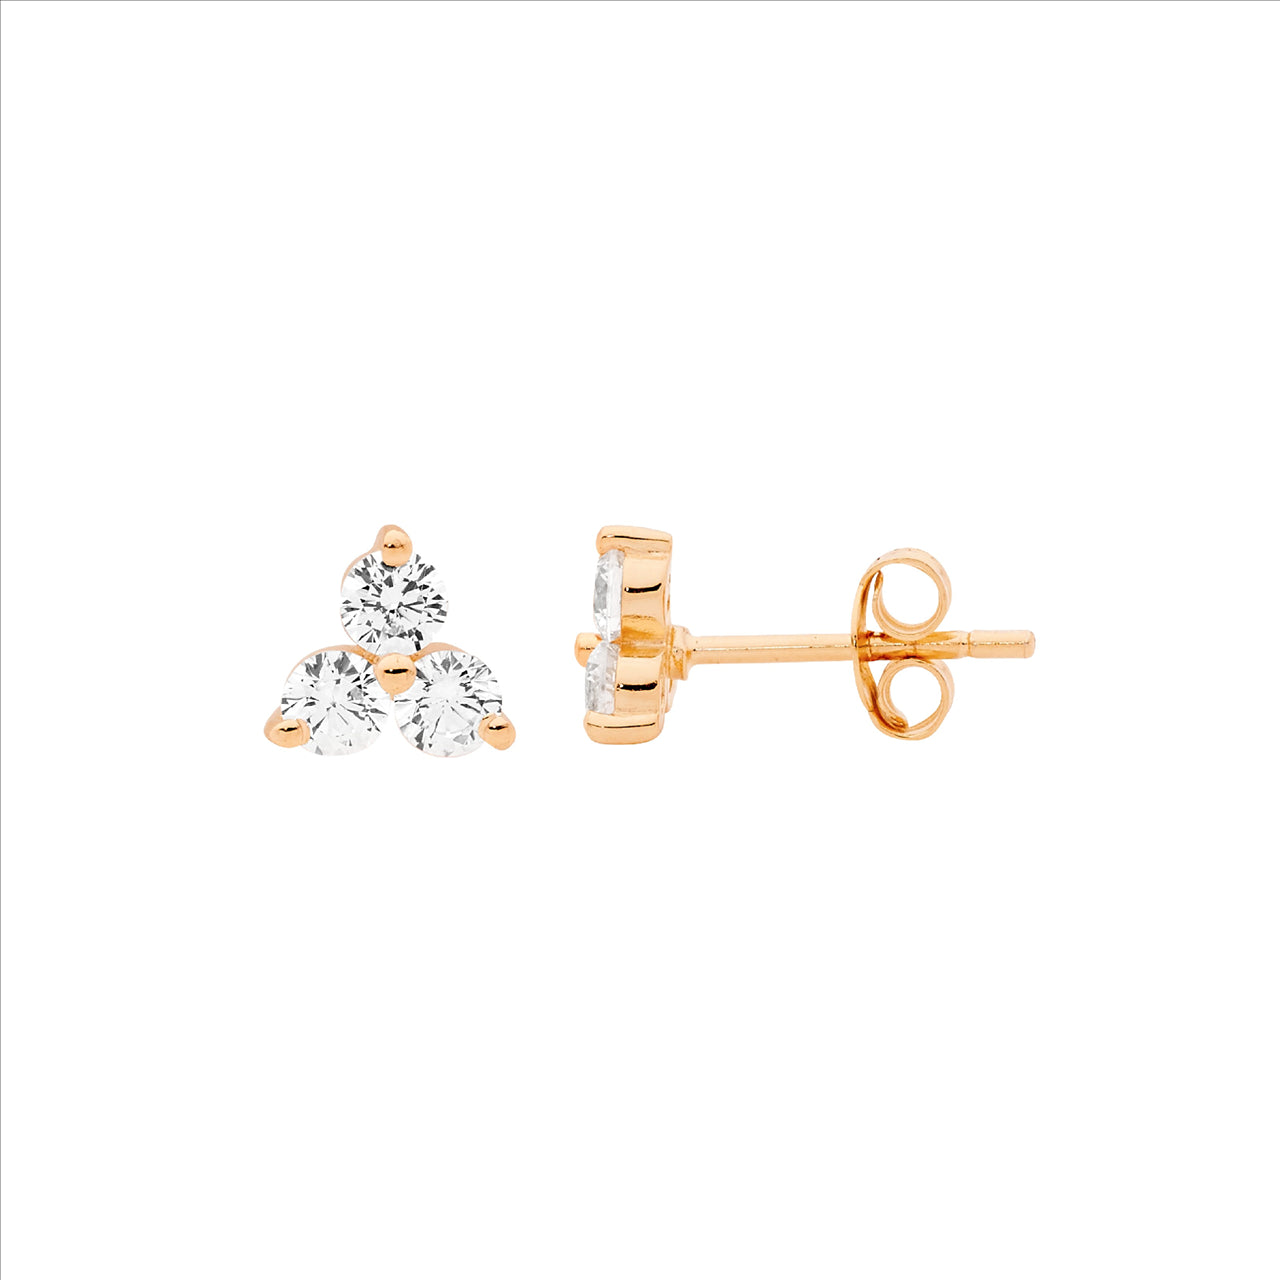 Cubic zirconia Triangle Stud Earrings - Rose gold Plate.